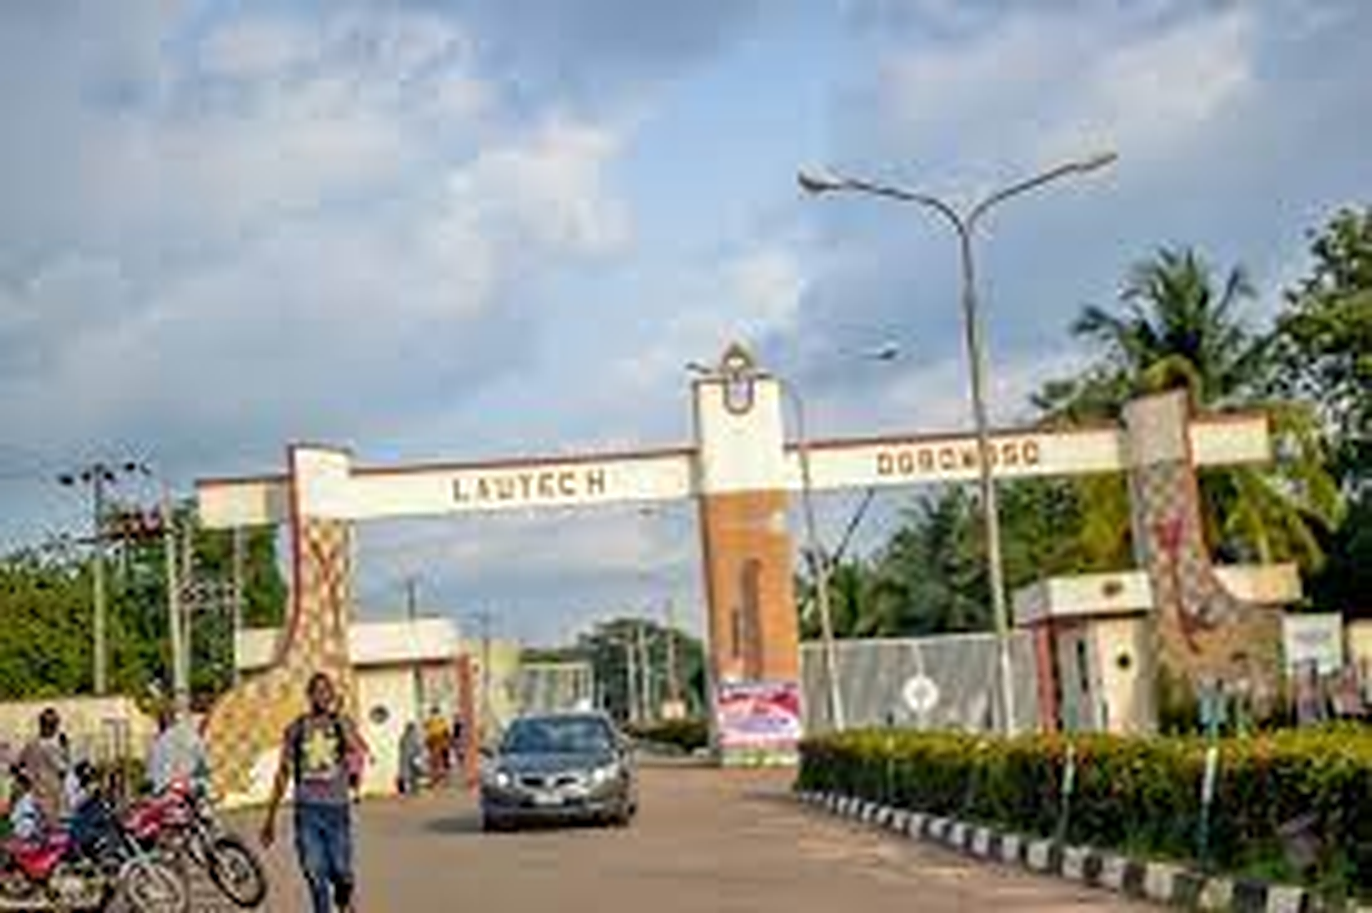 LAUTECH bans students from driving cars to campus